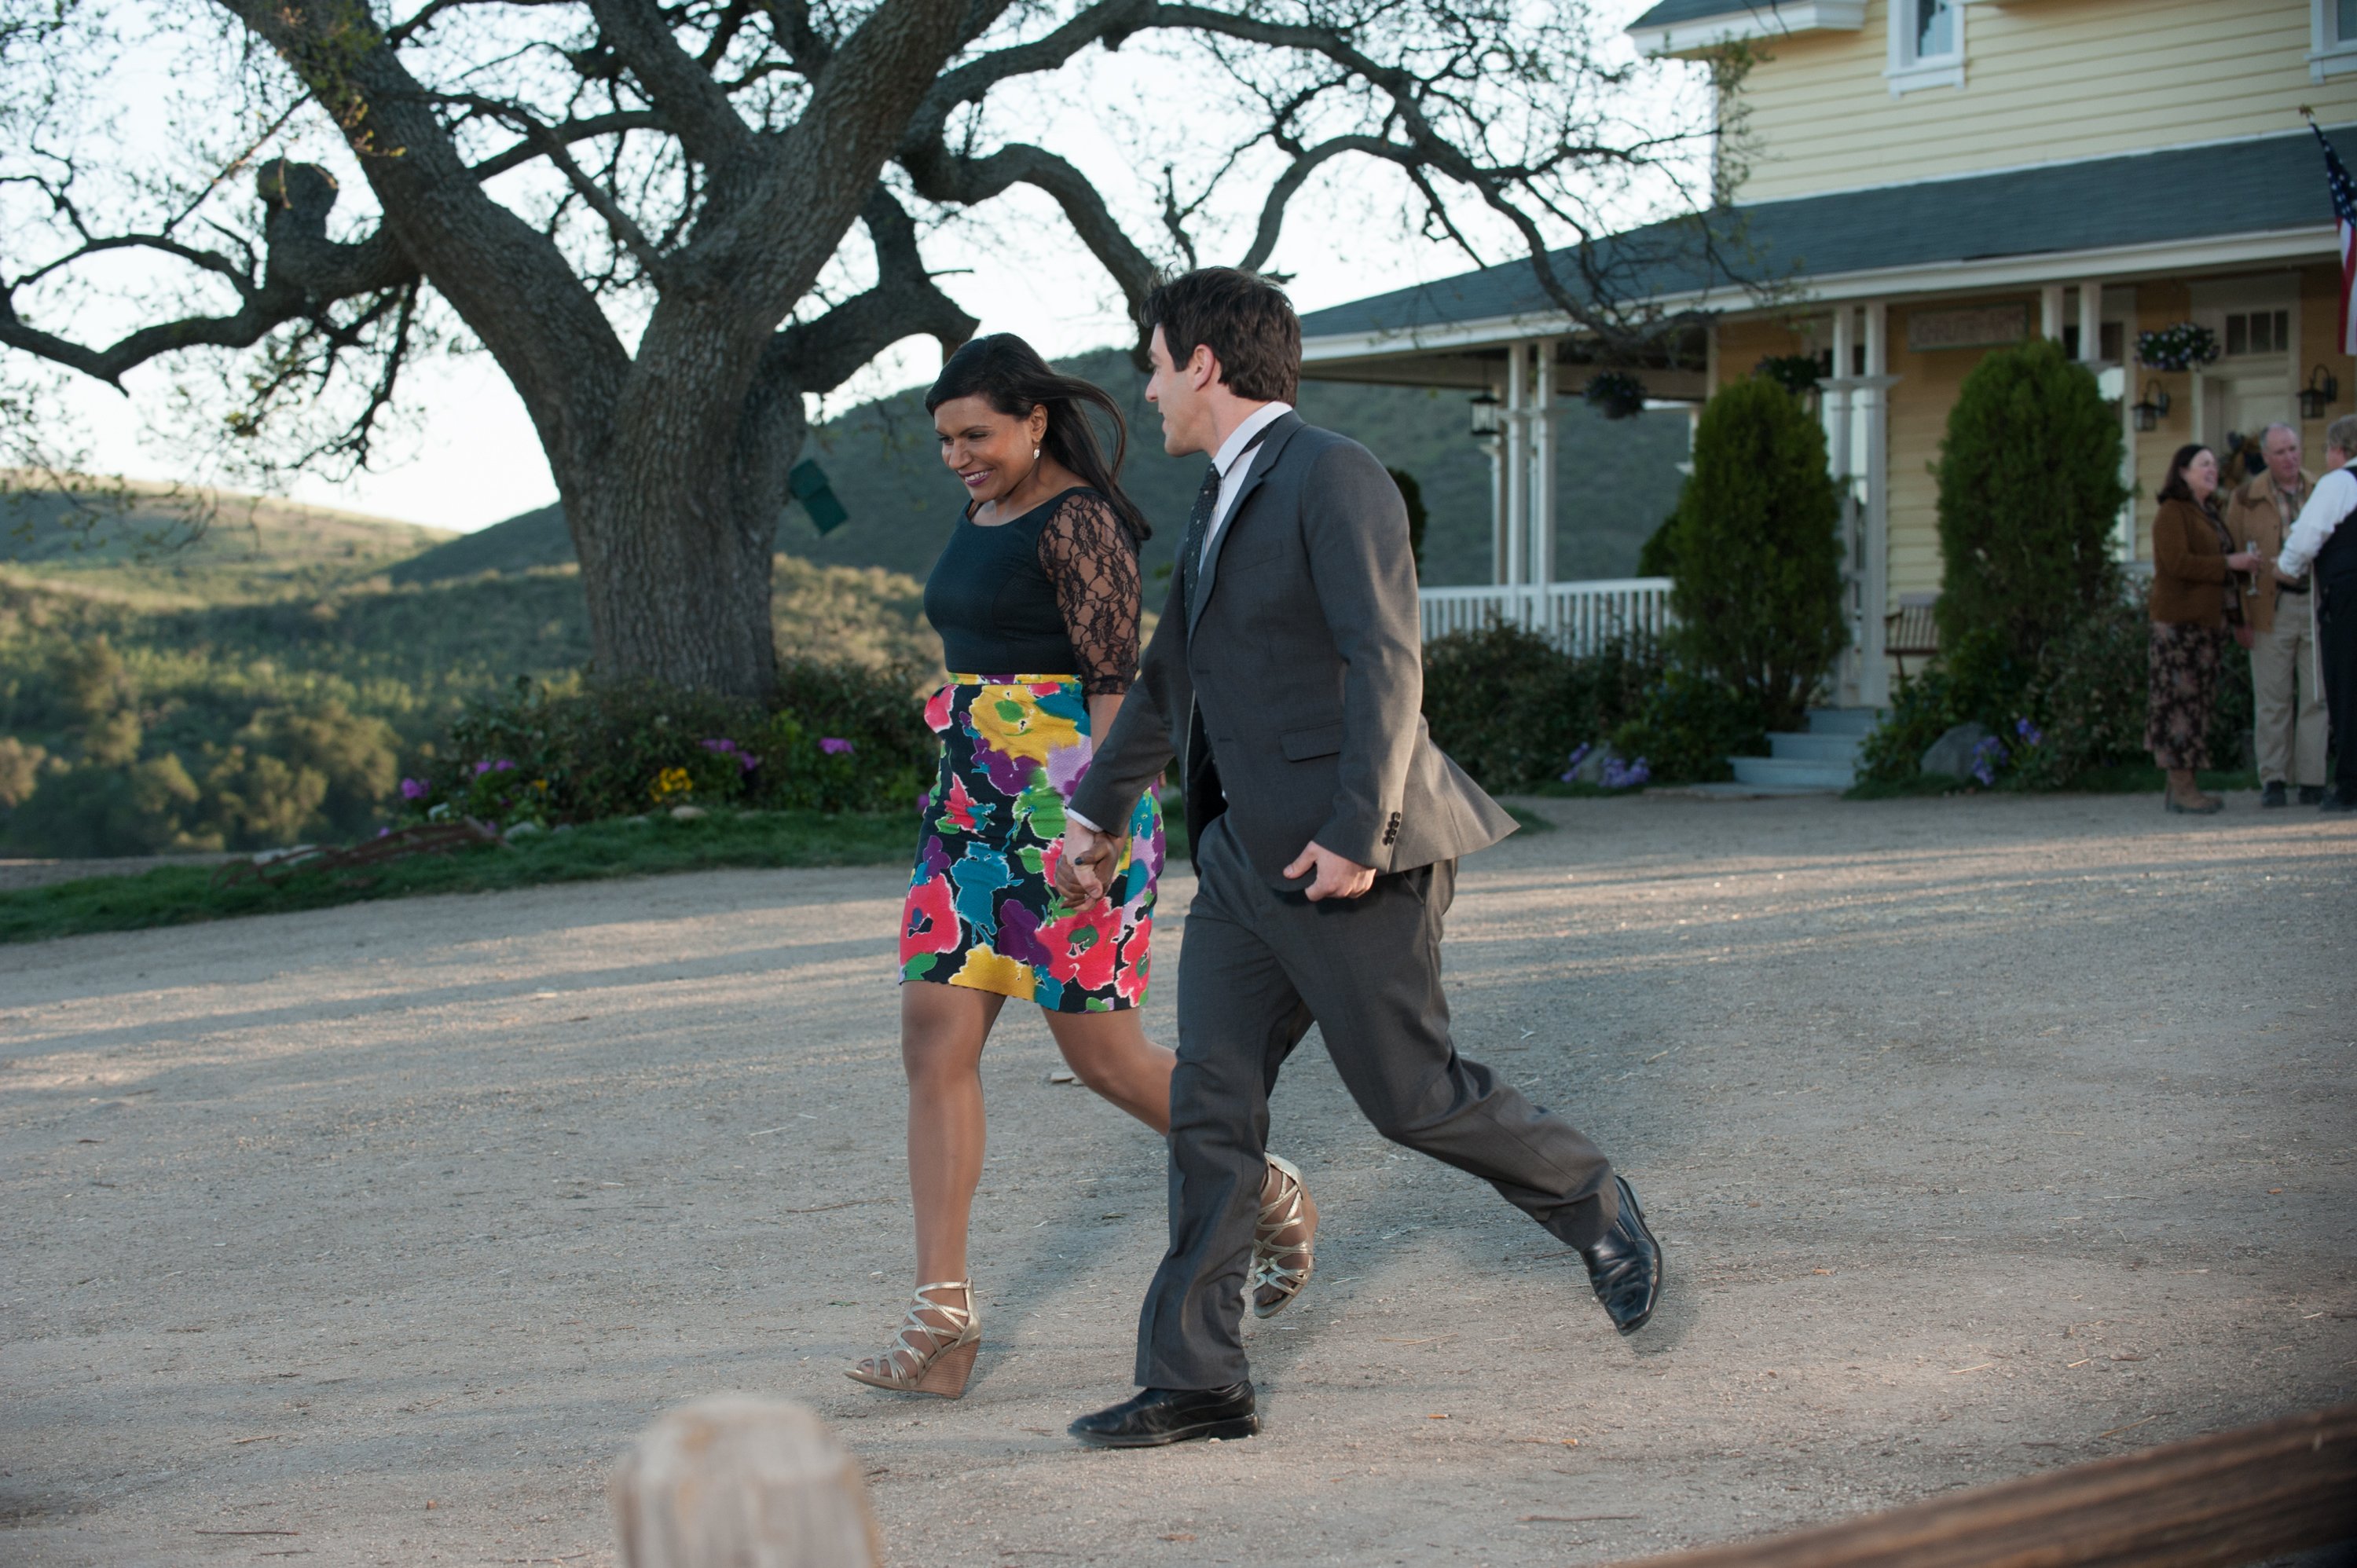 Mindy Kaling and B.J. Novak during "The Office" Season Nine's "Finale" Episode in 2013. | Source: Getty Images